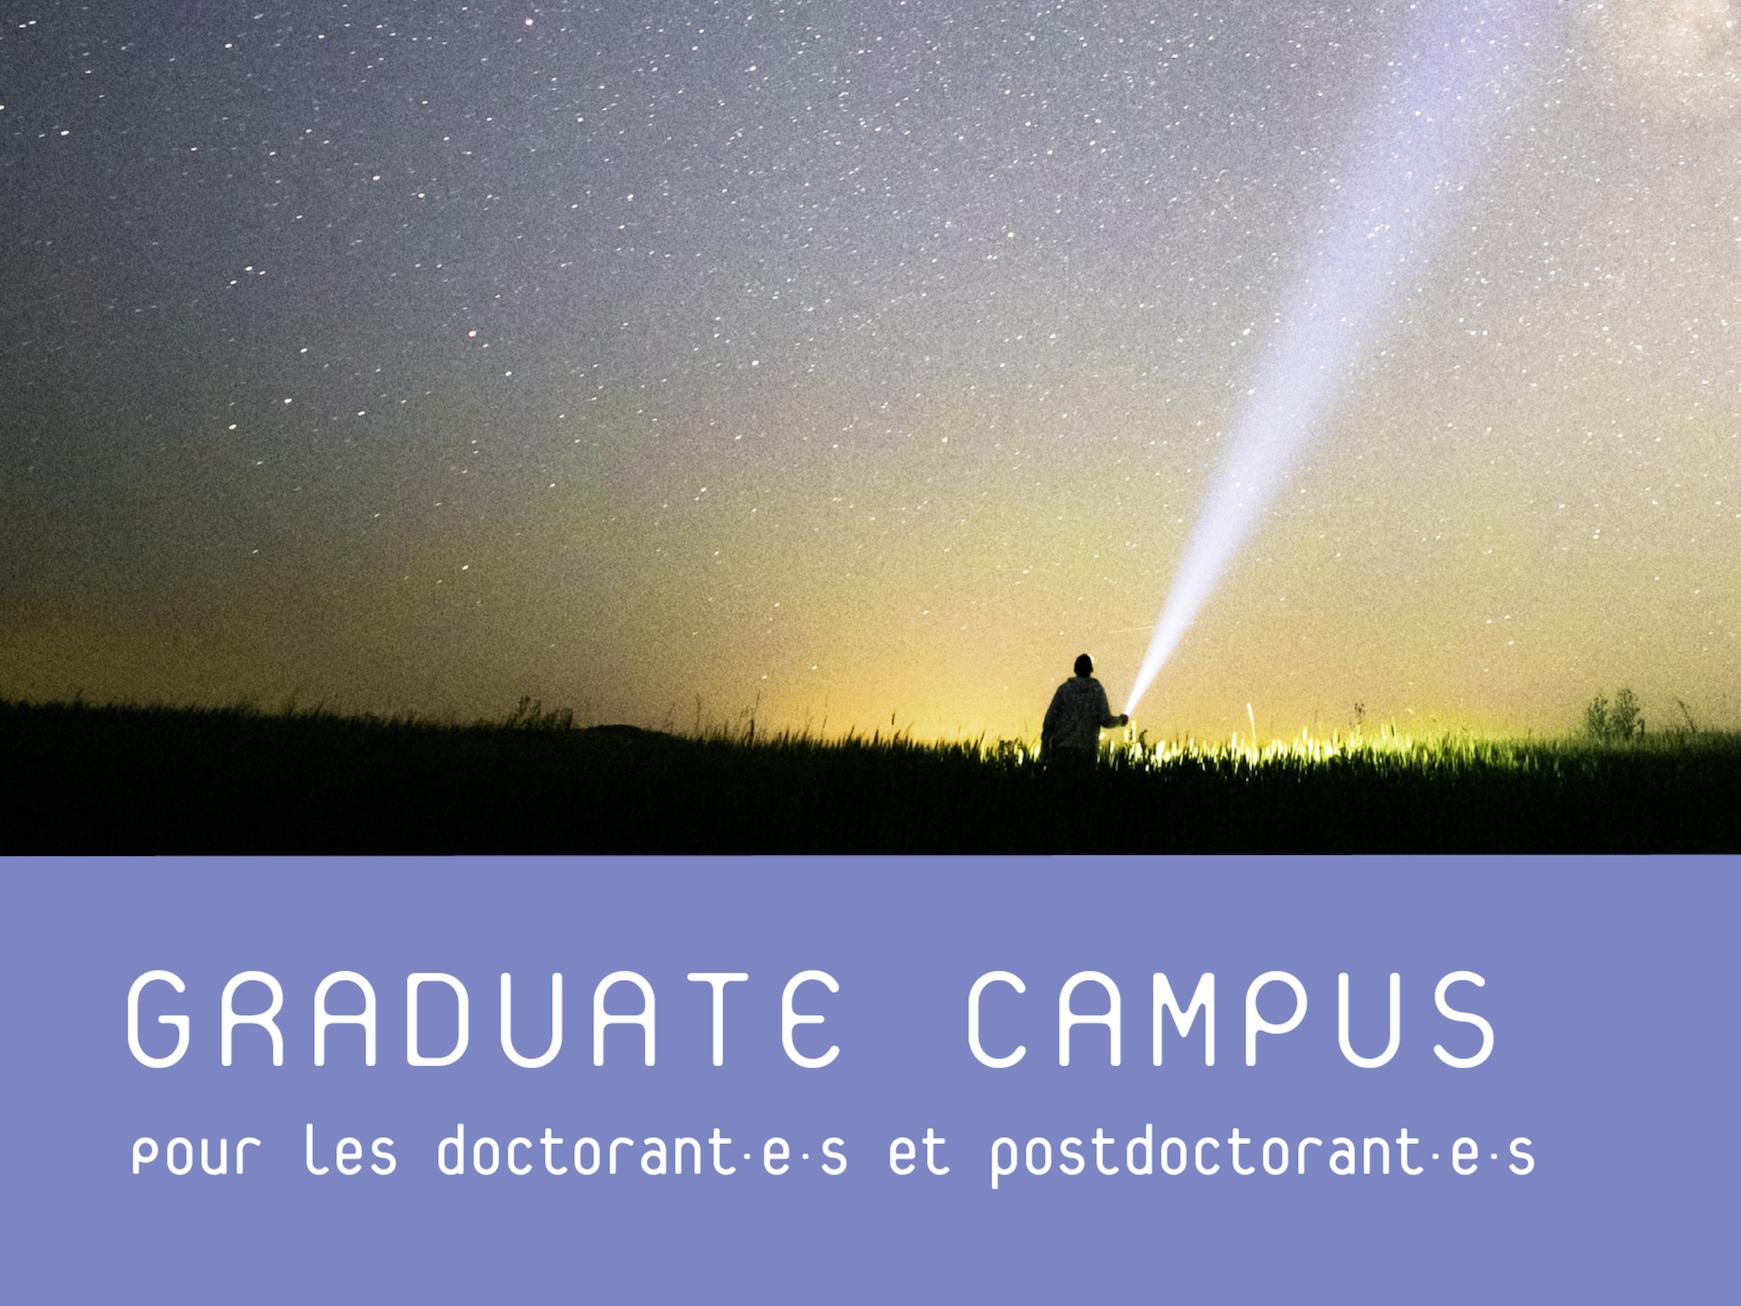 Workshops for doctoral and postdoctoral researchers